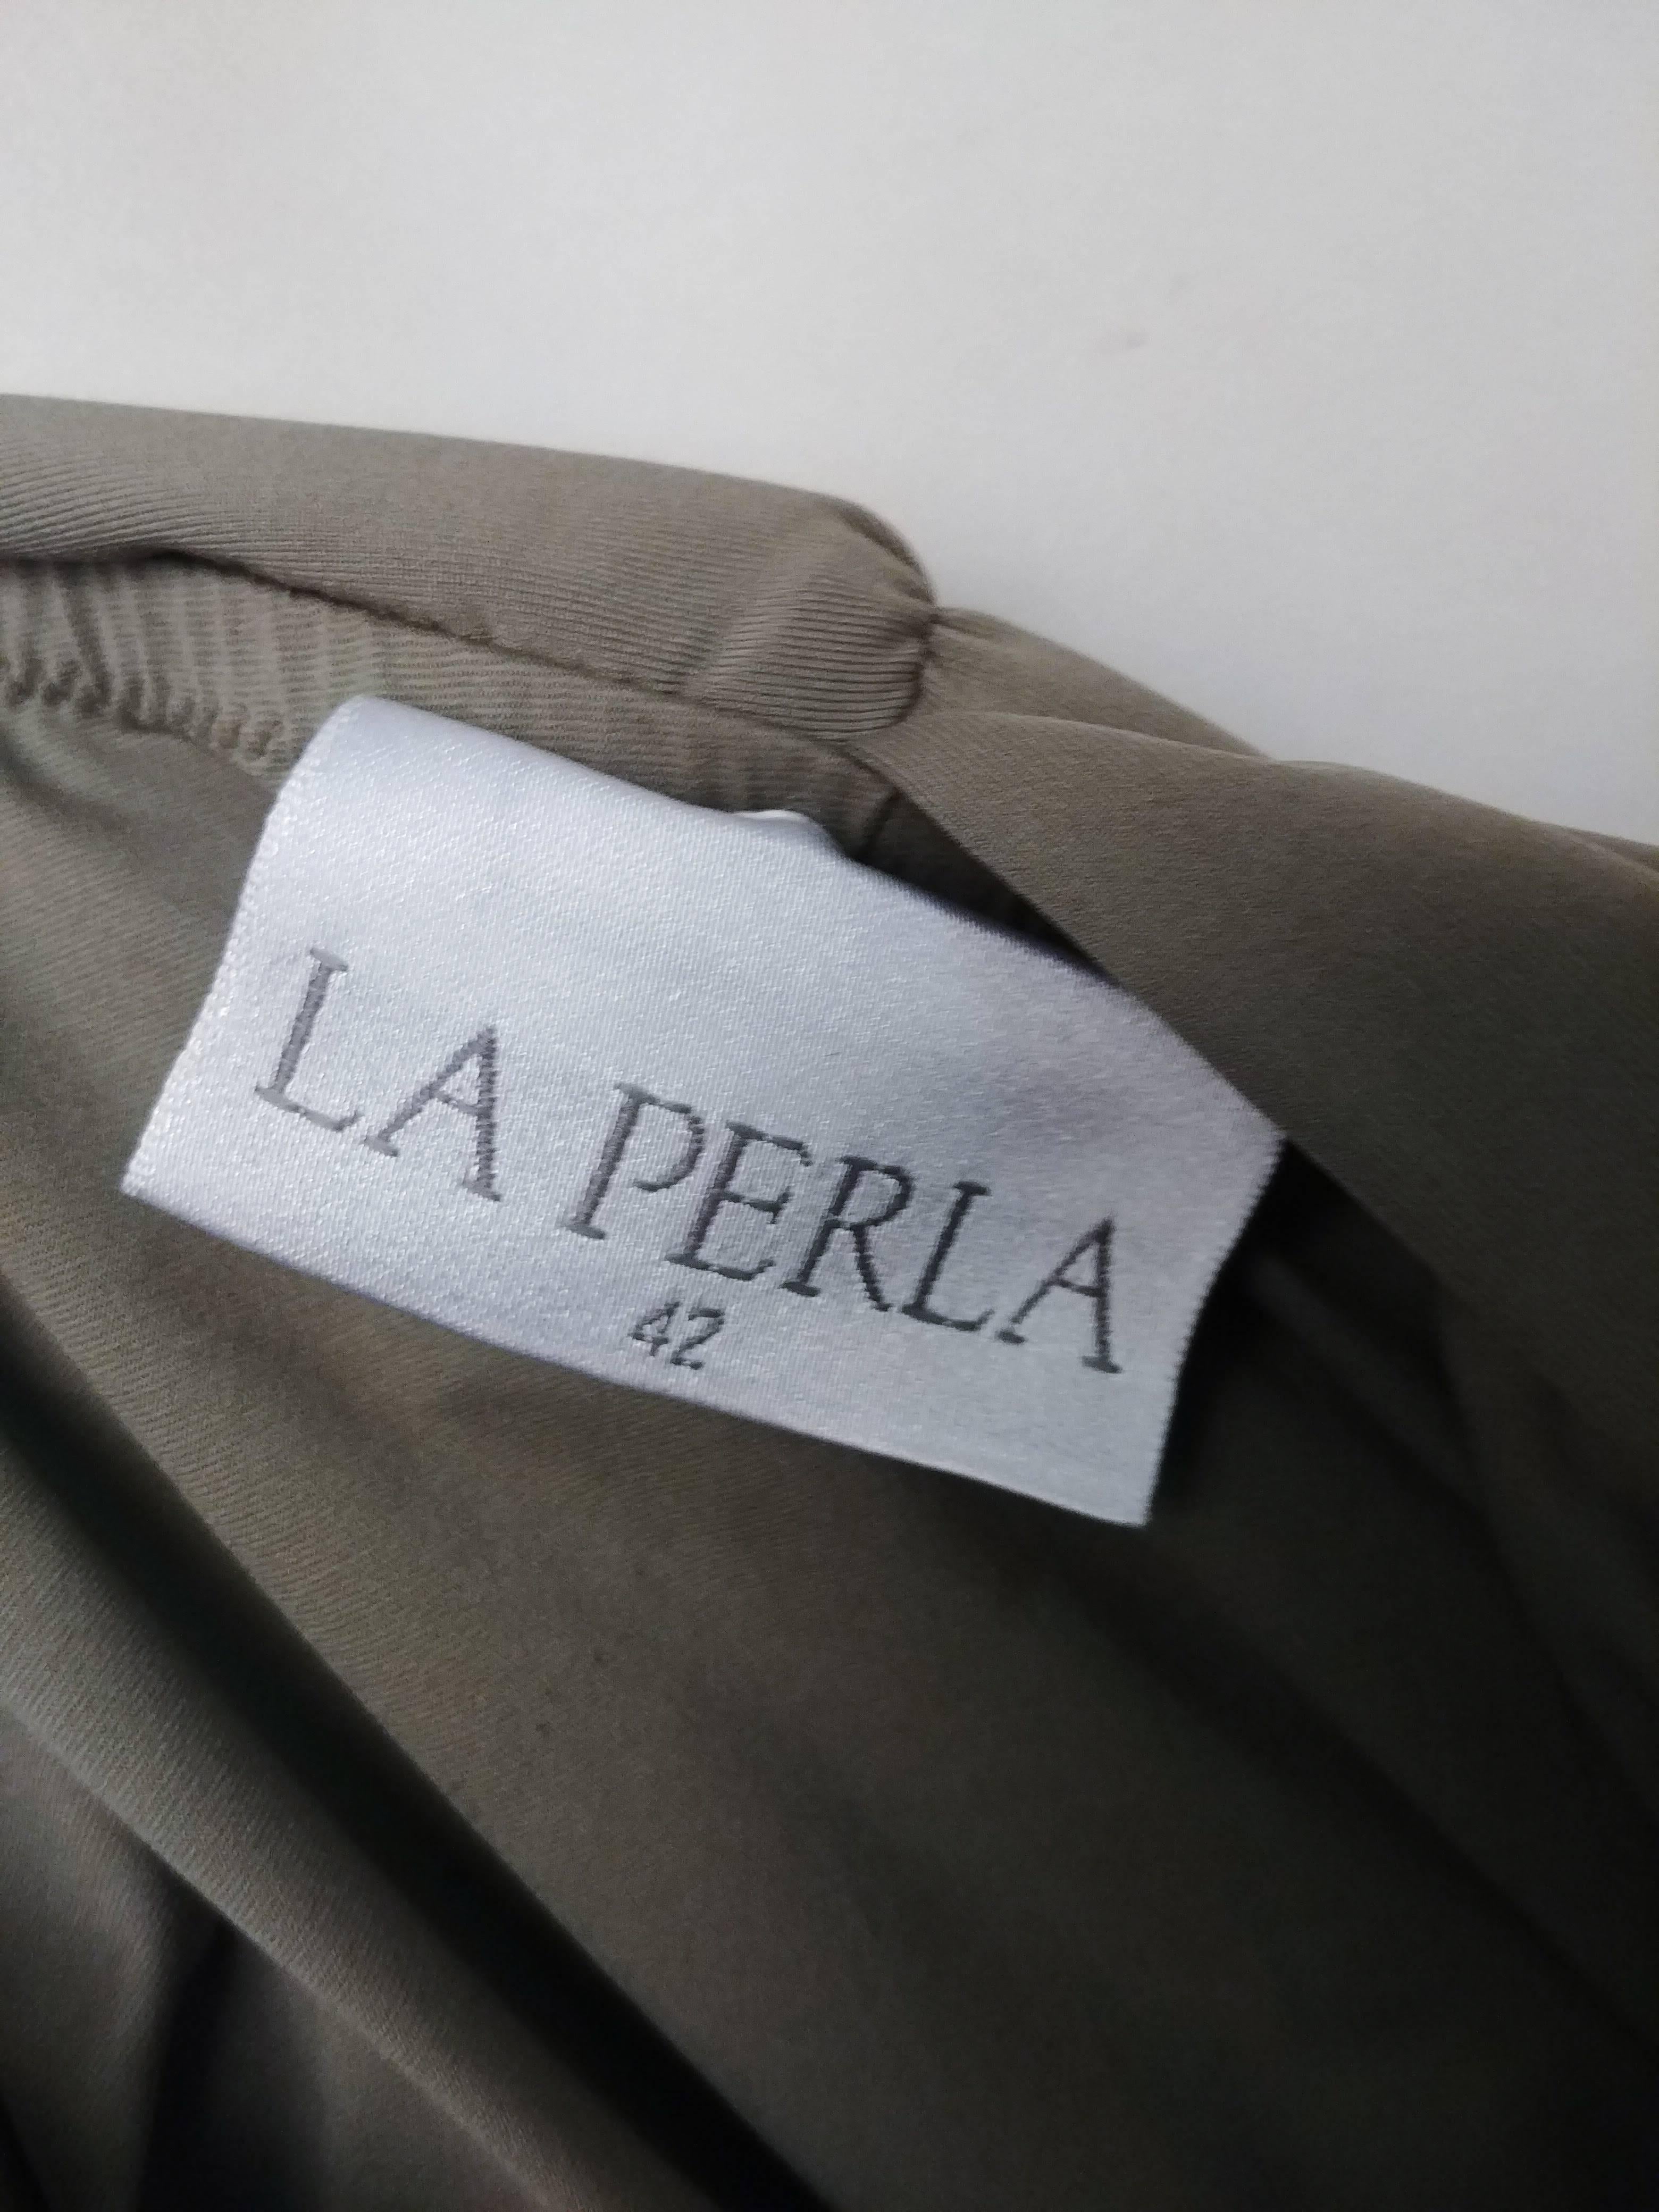 La Perla Olive Khaki Ruched Jersey Top In Excellent Condition In San Francisco, CA